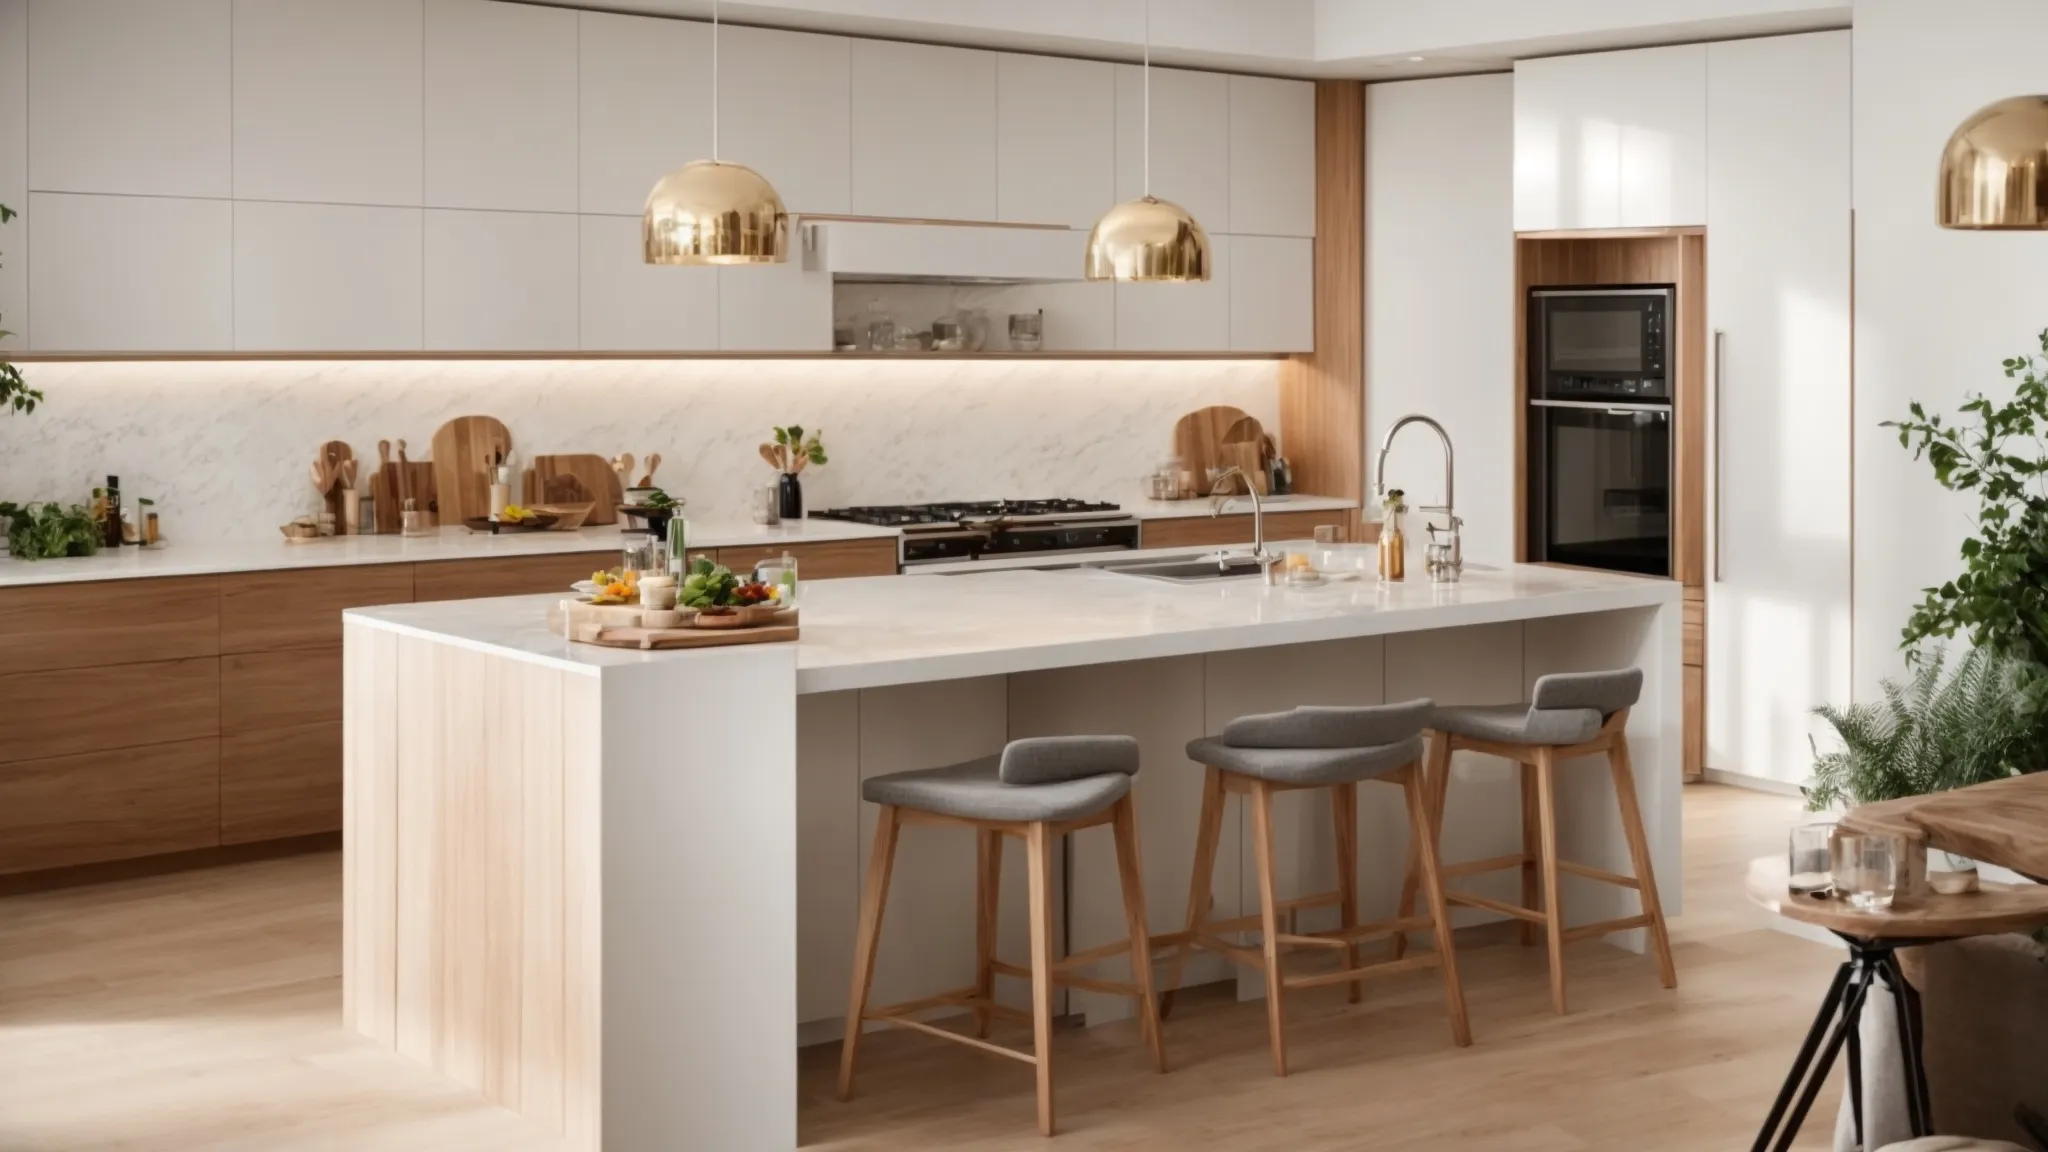 a modern kitchen island with built-in appliances and bar stools invites a casual gathering in a bright, spacious kitchen.